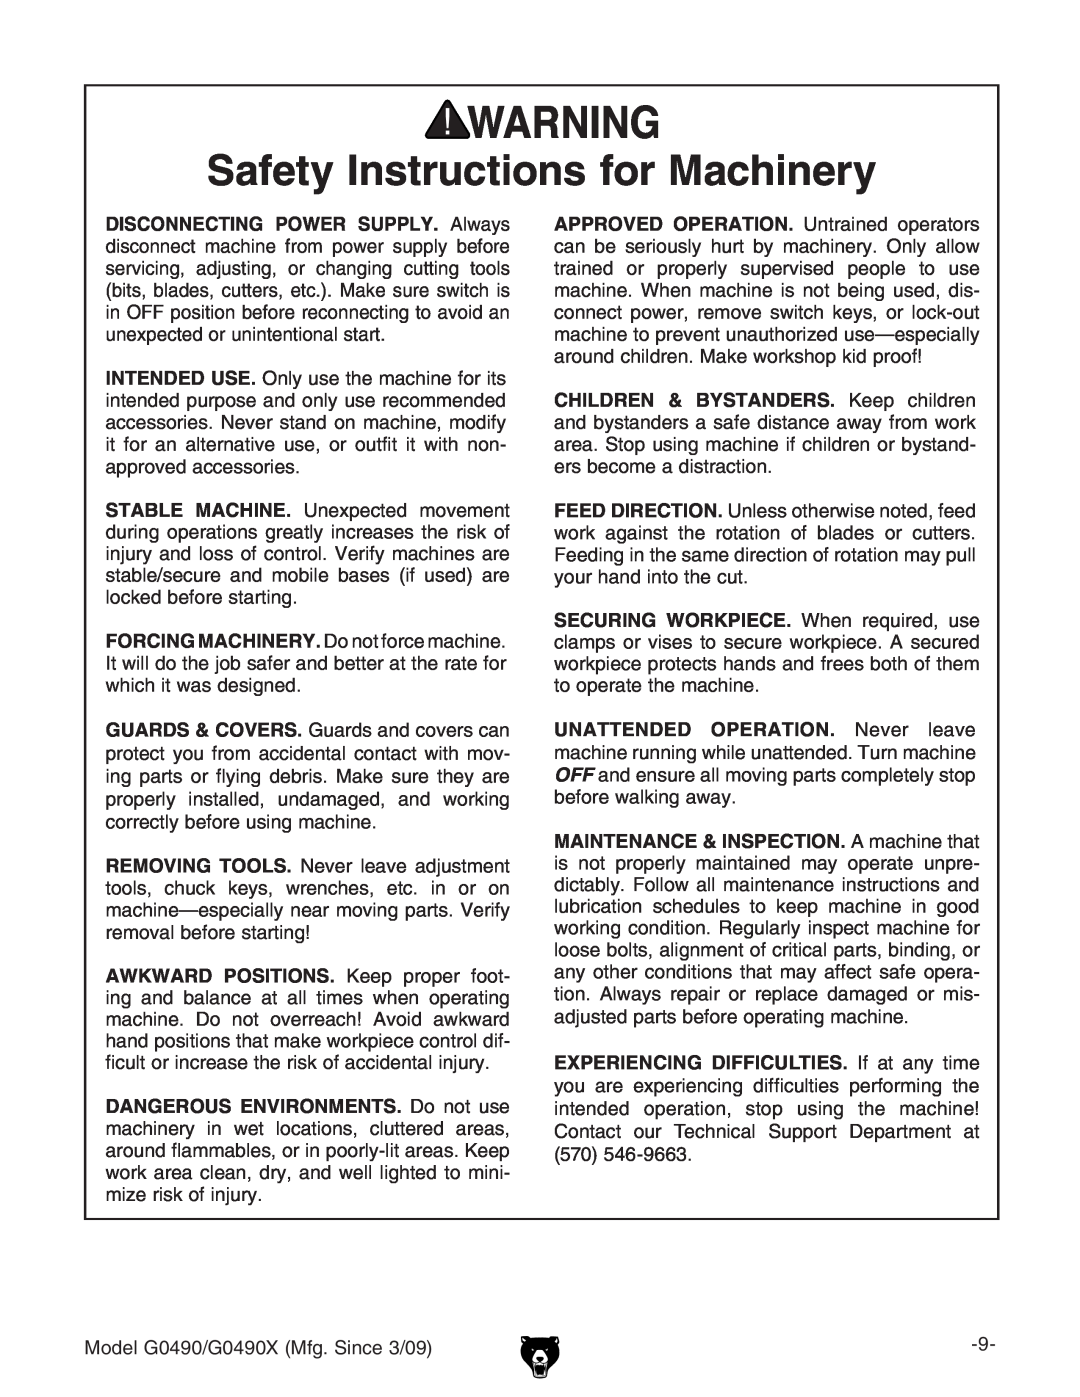 Grizzly G0490 Safety Instructions for Machinery, CHILDREN & BYSTANDERS. @ZZe XaYgZc, BdYZa%.%$%.%MB\#HcXZ$%. 